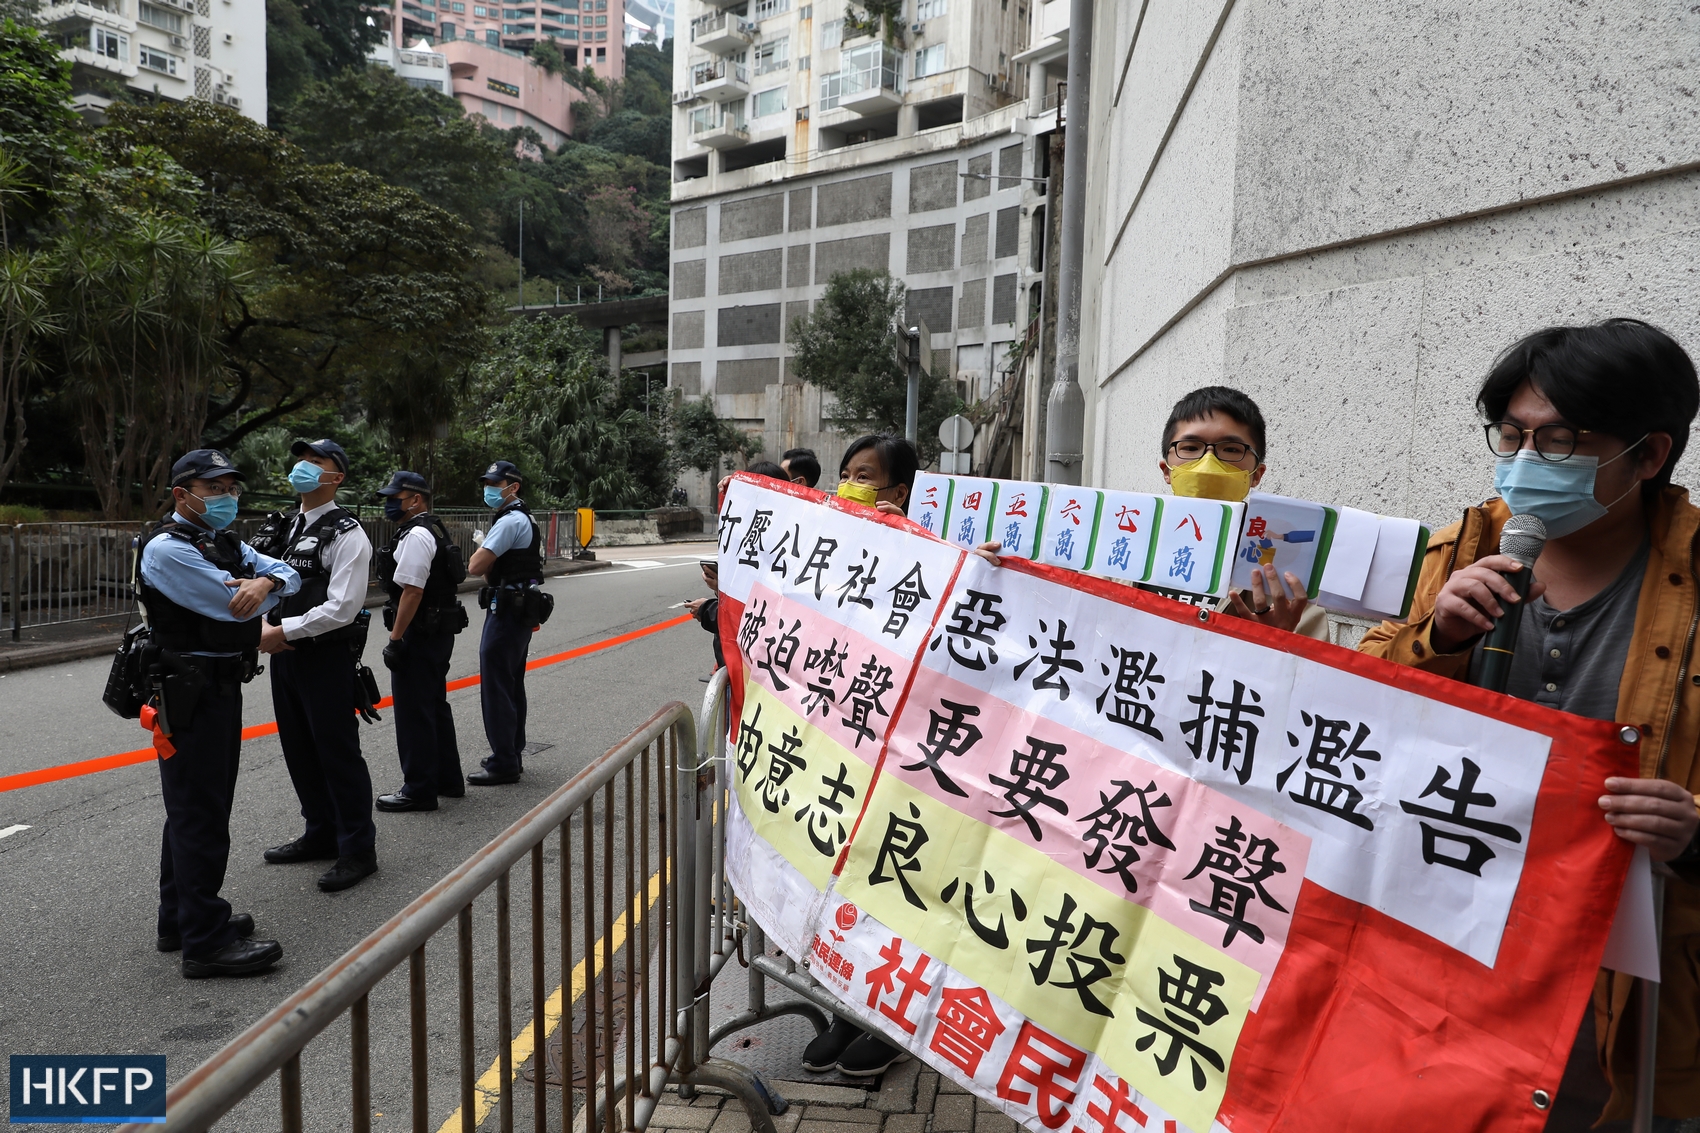 2021 Legco election: Members of the League of Social Democrat, including Chan Po-ying, led a four-person protest near Raimondi College as the chief executive casted her ballot. Photo: Kyle Lam/HKFP.